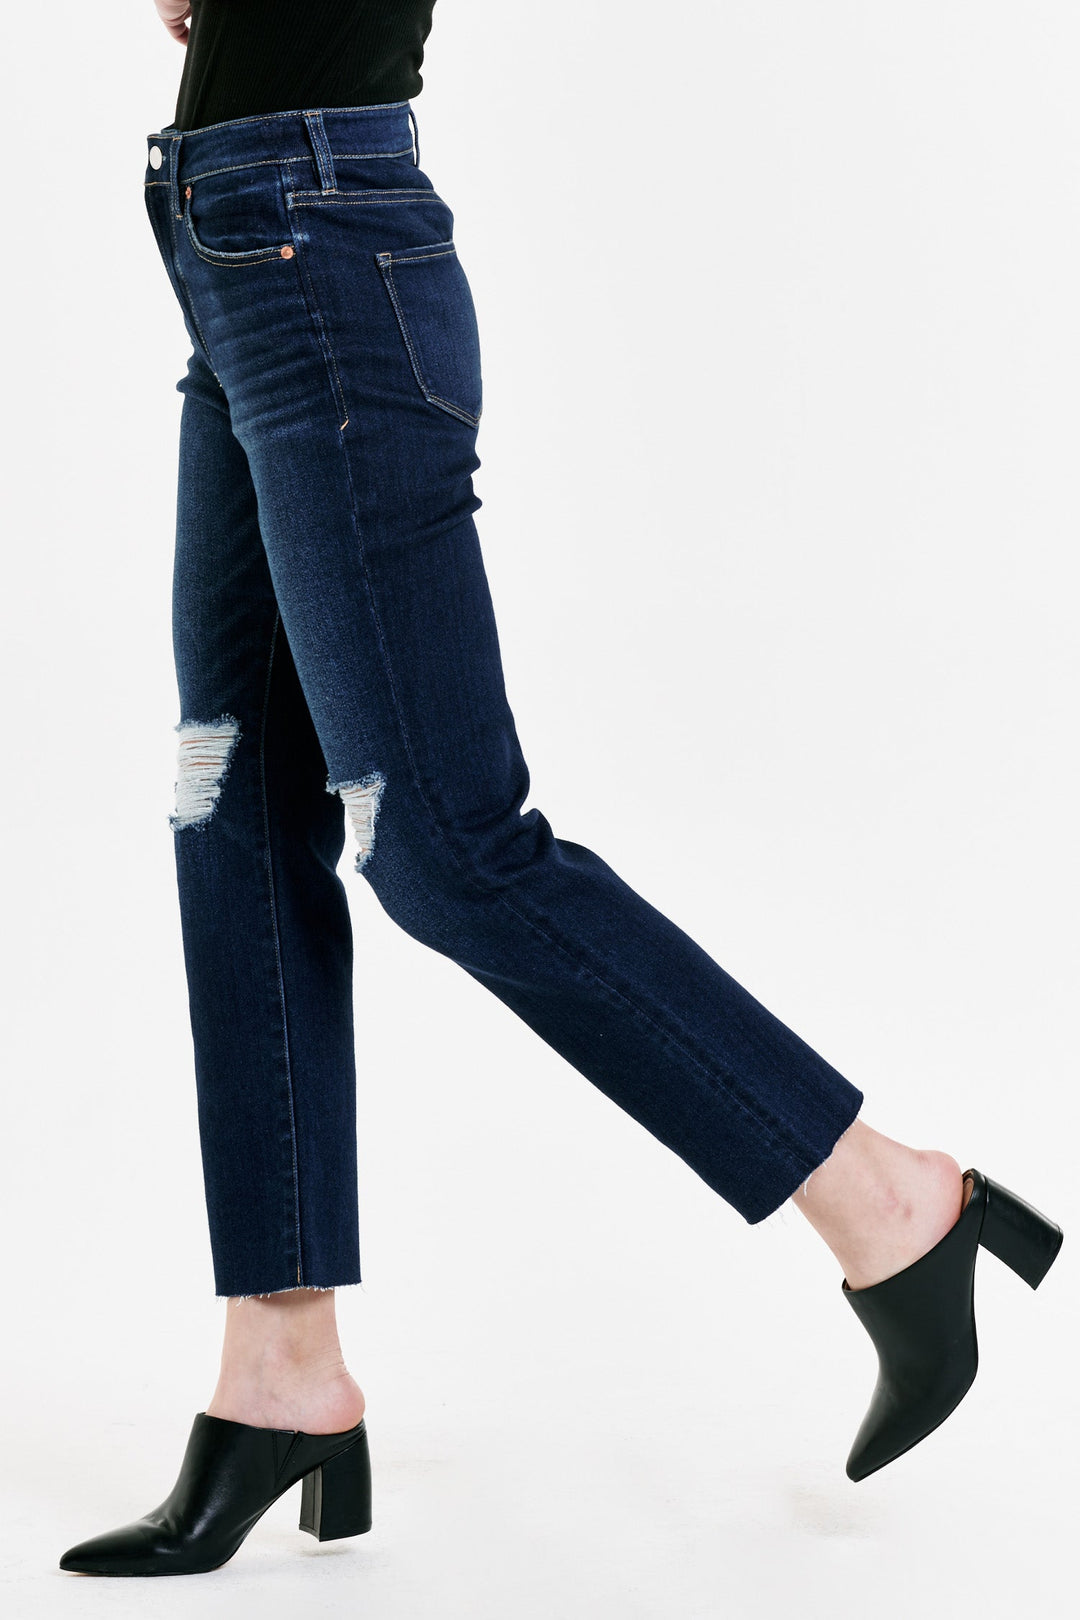 image of a female model wearing a FRANKIE SUPER HIGH RISE CROPPED STRAIGHT JEANS GALVIE DEAR JOHN DENIM 